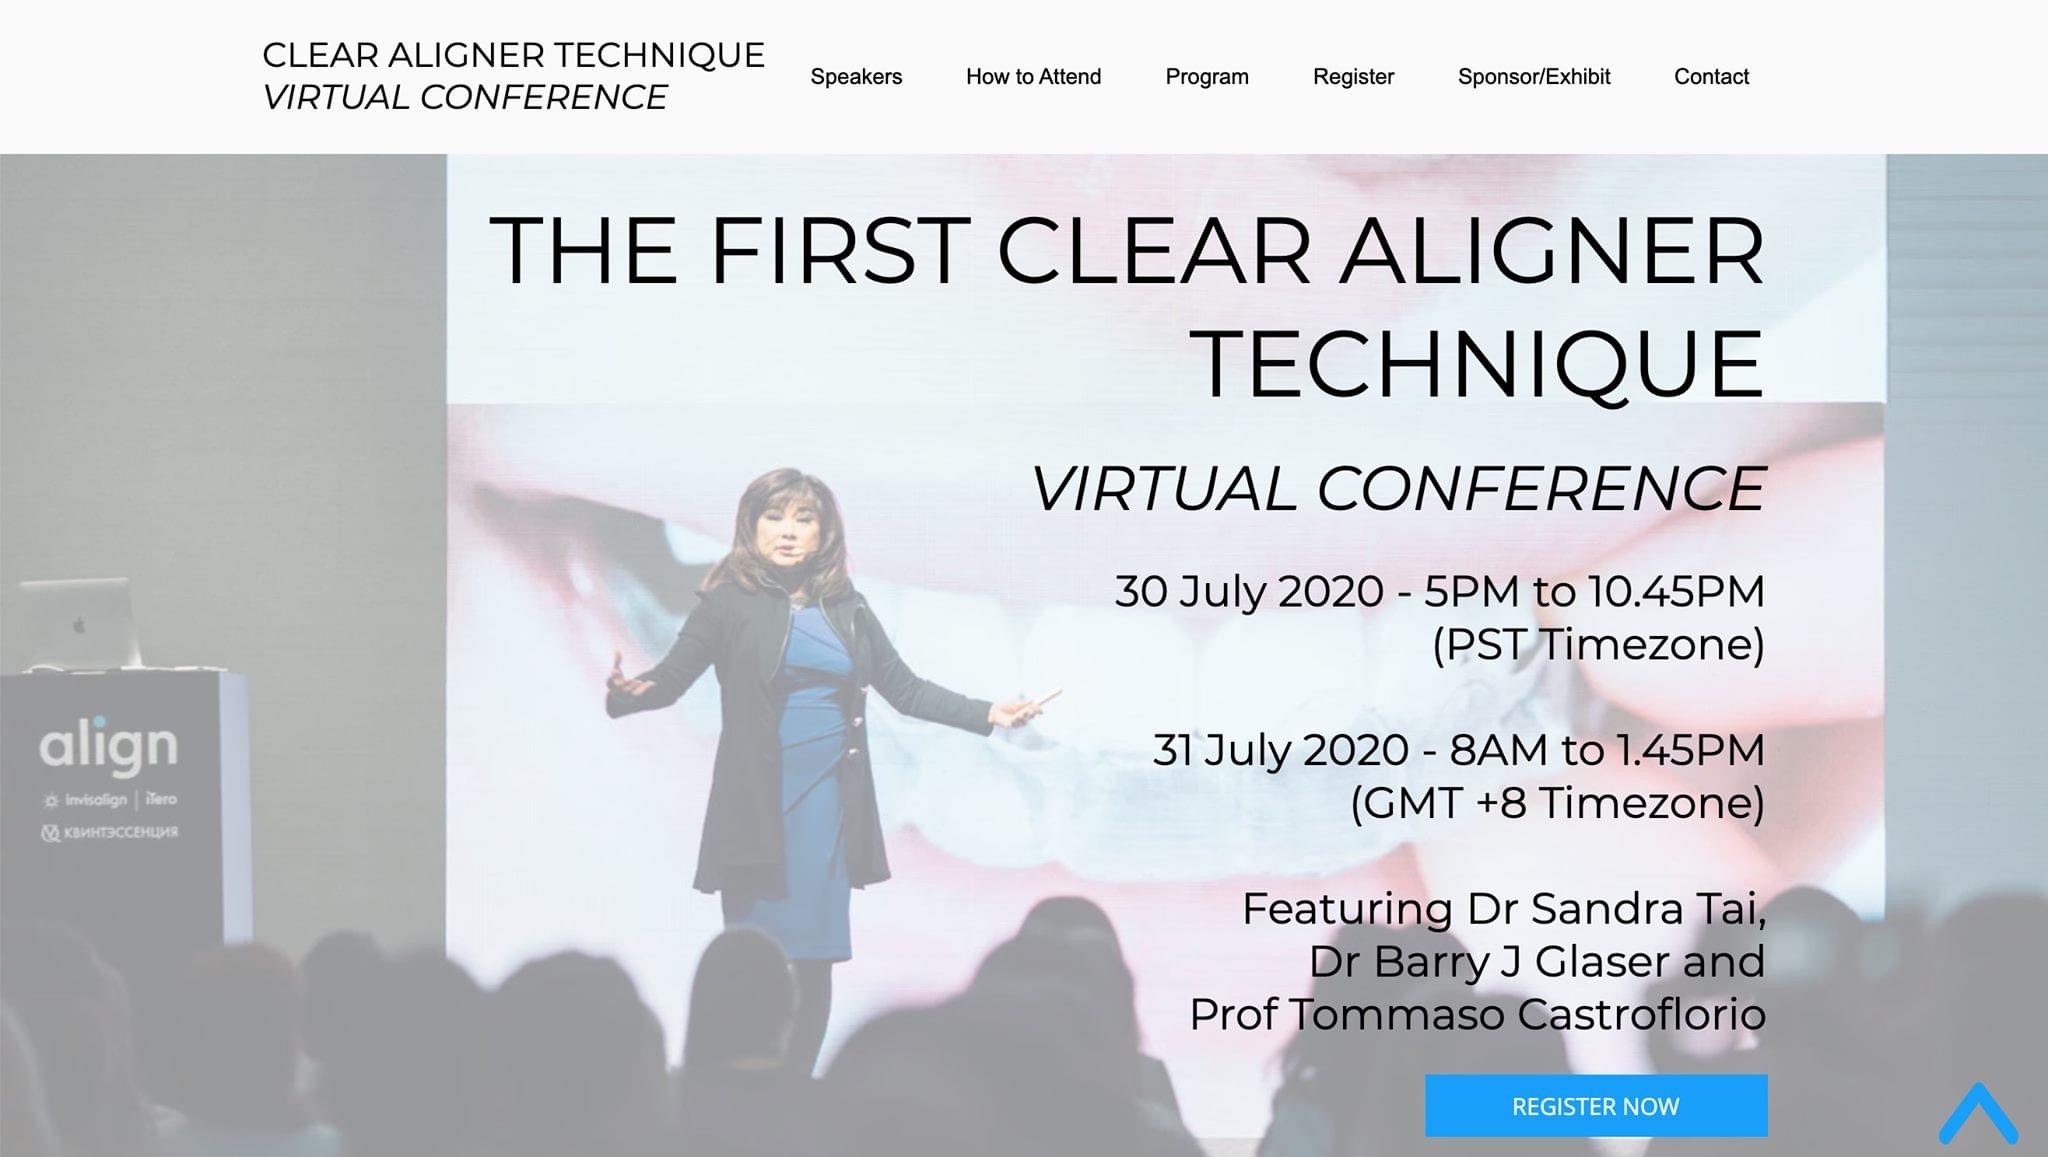 Clear Aligner Virtual Conference by Dr.Sandra Tai, Dr.Barry Glaser, Prof.Tommaso Castroflorio